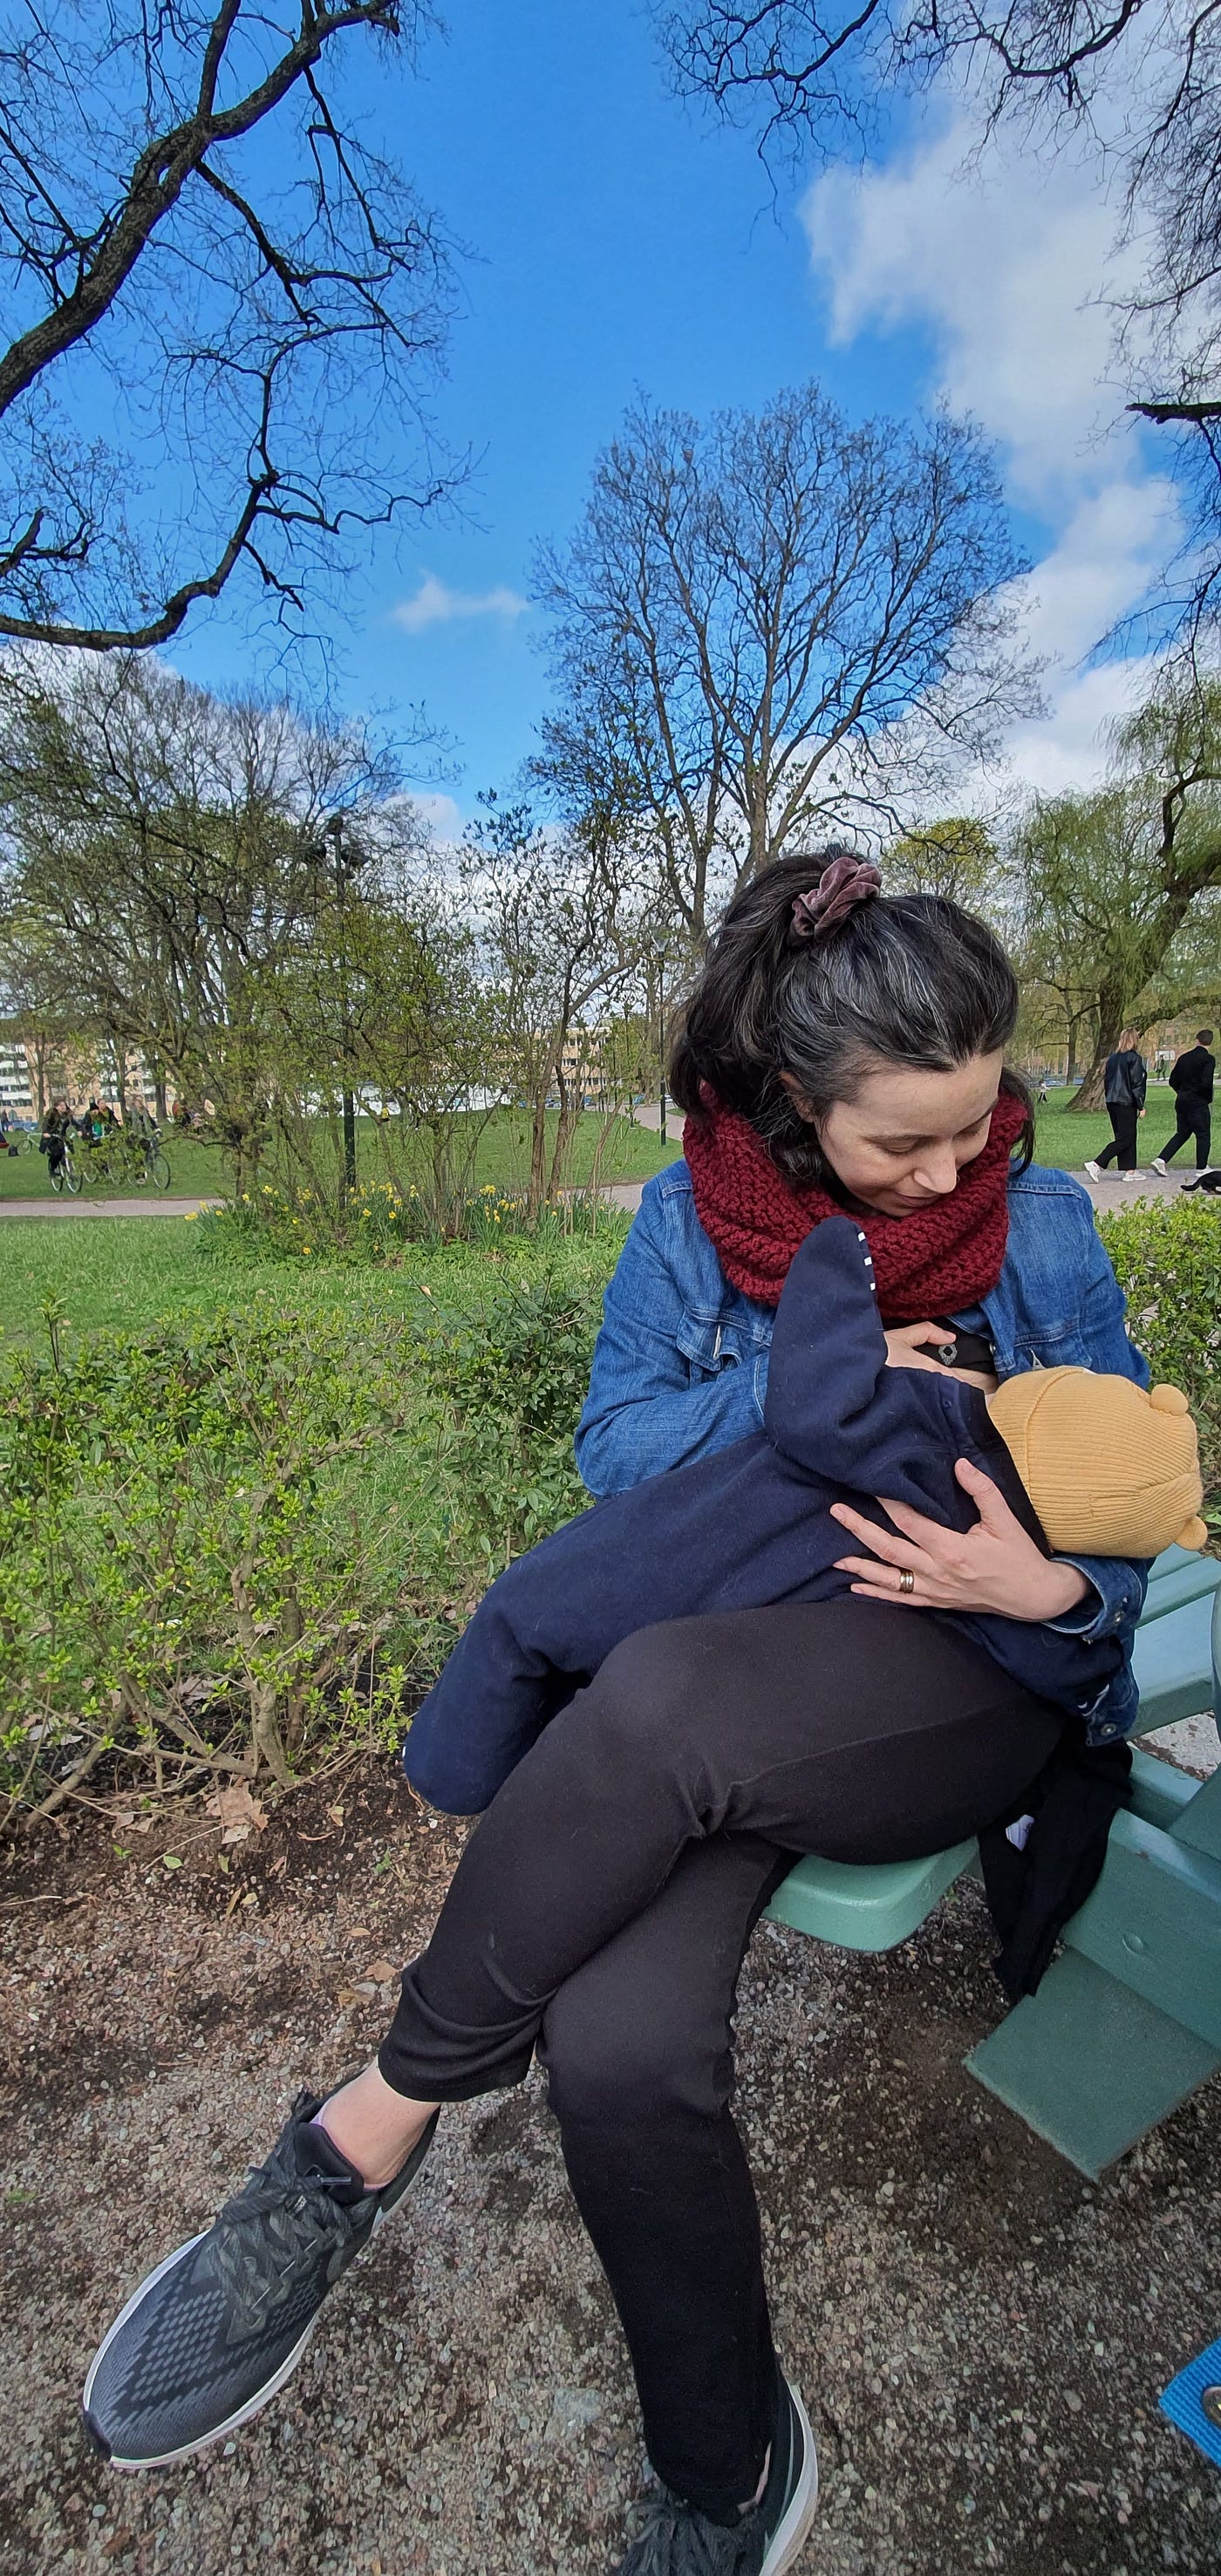 A letter to my past self about breastfeeding, by Caitlin McEvoy